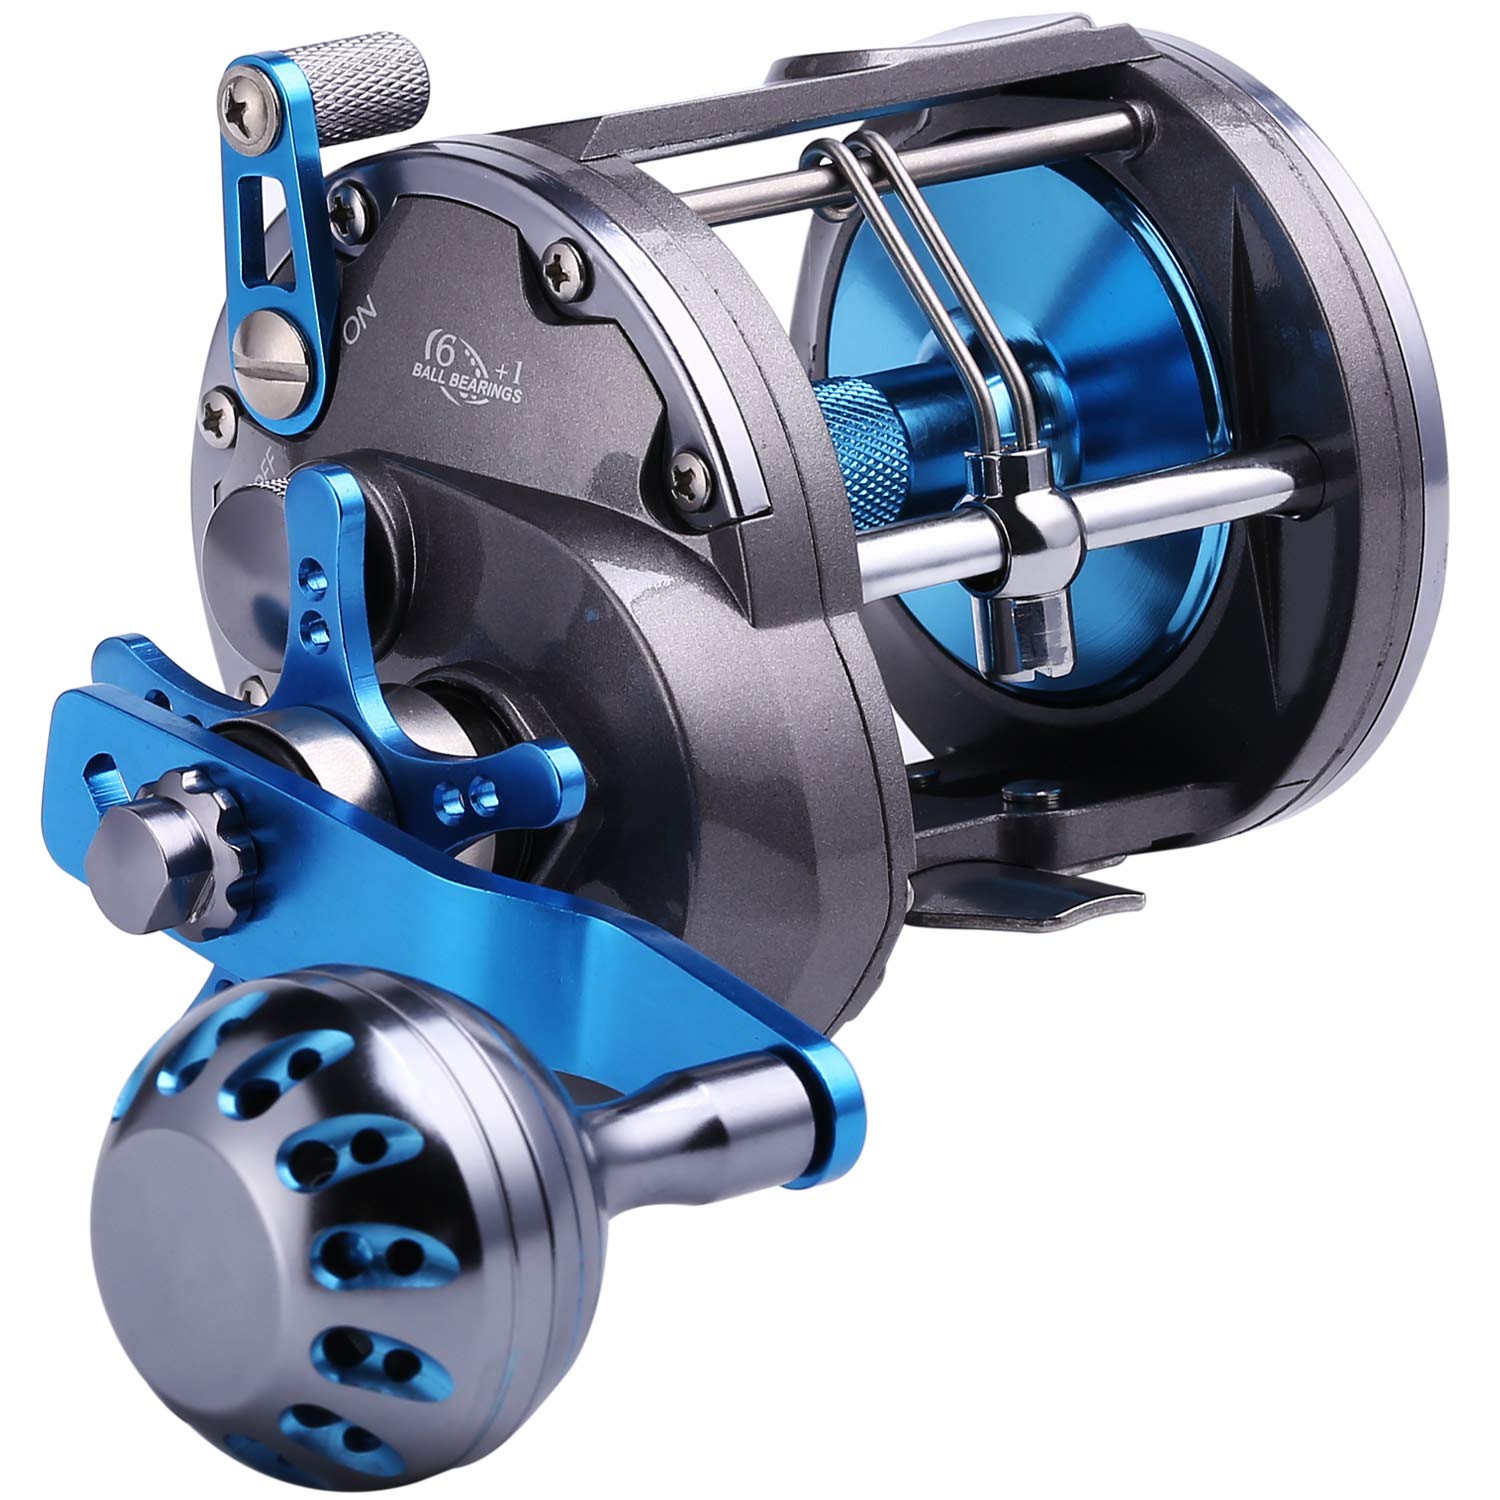 ZF-SHA4000 Right Handed - Sougayilang Line Counter Trolling Reel Conventional Level Wind Fishing Reel並行輸入品